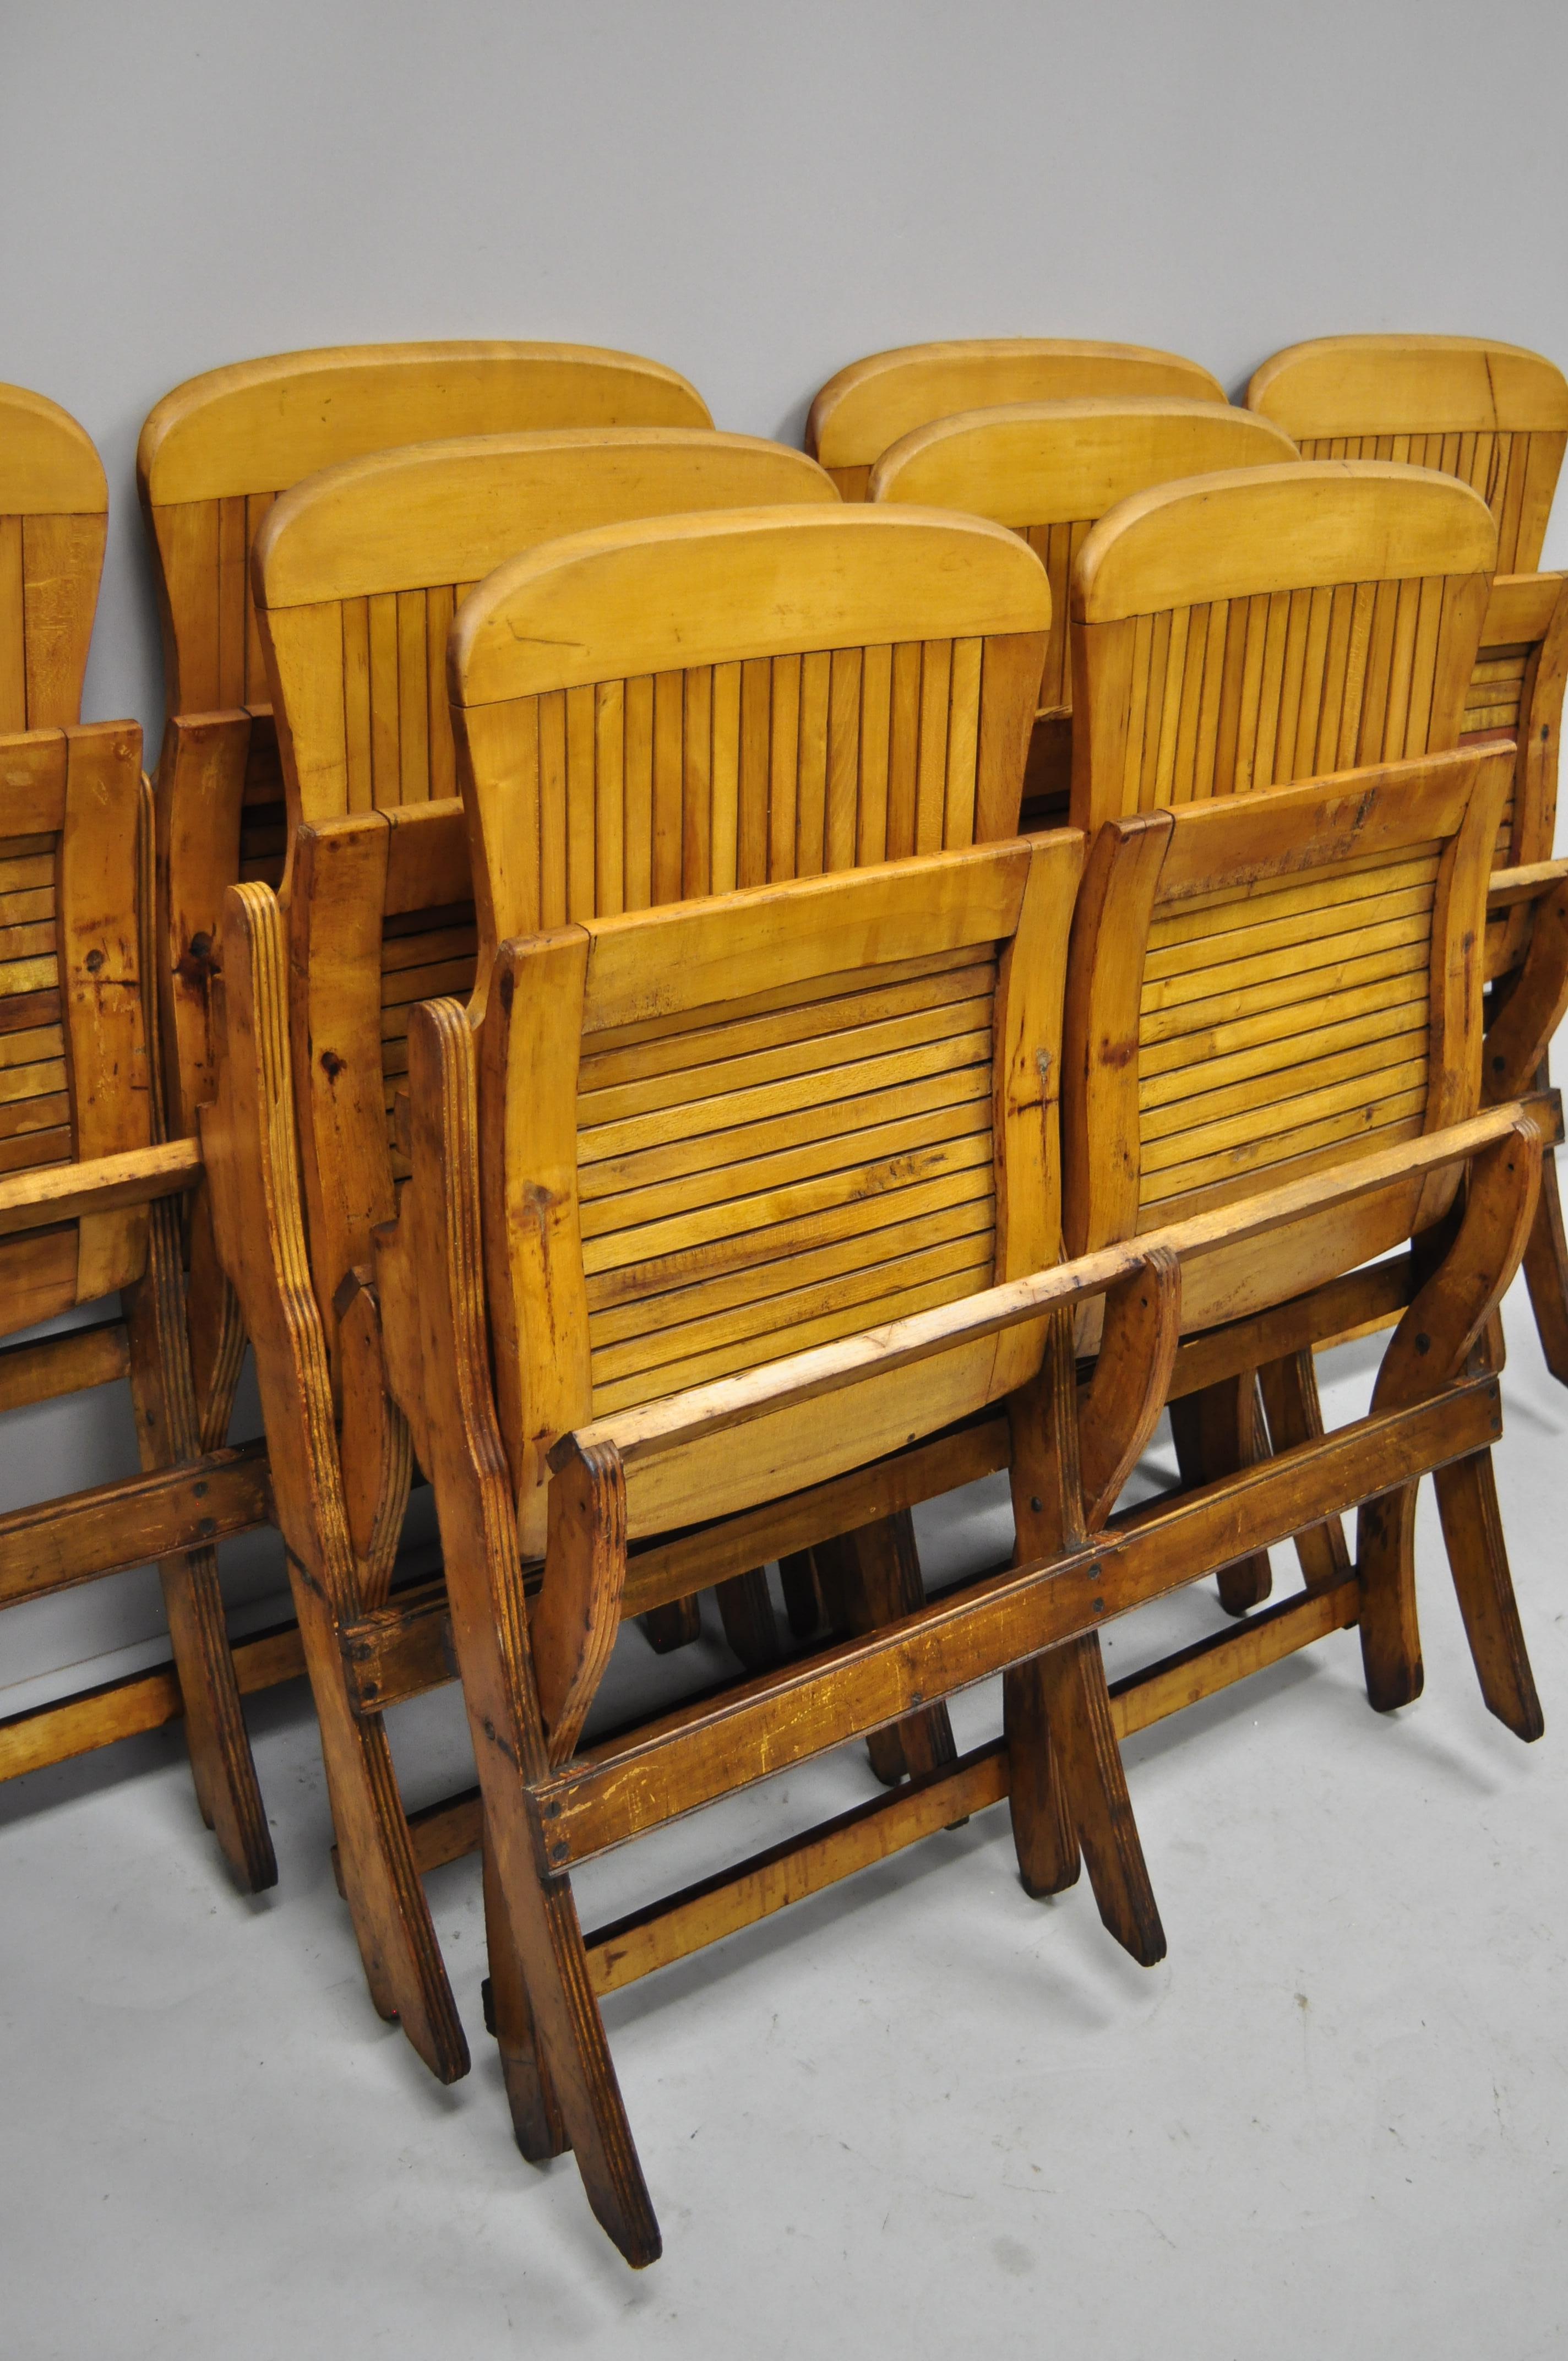 American Antique Vintage Wood Slat Double Folding Seat Theater School Old Pew Chair